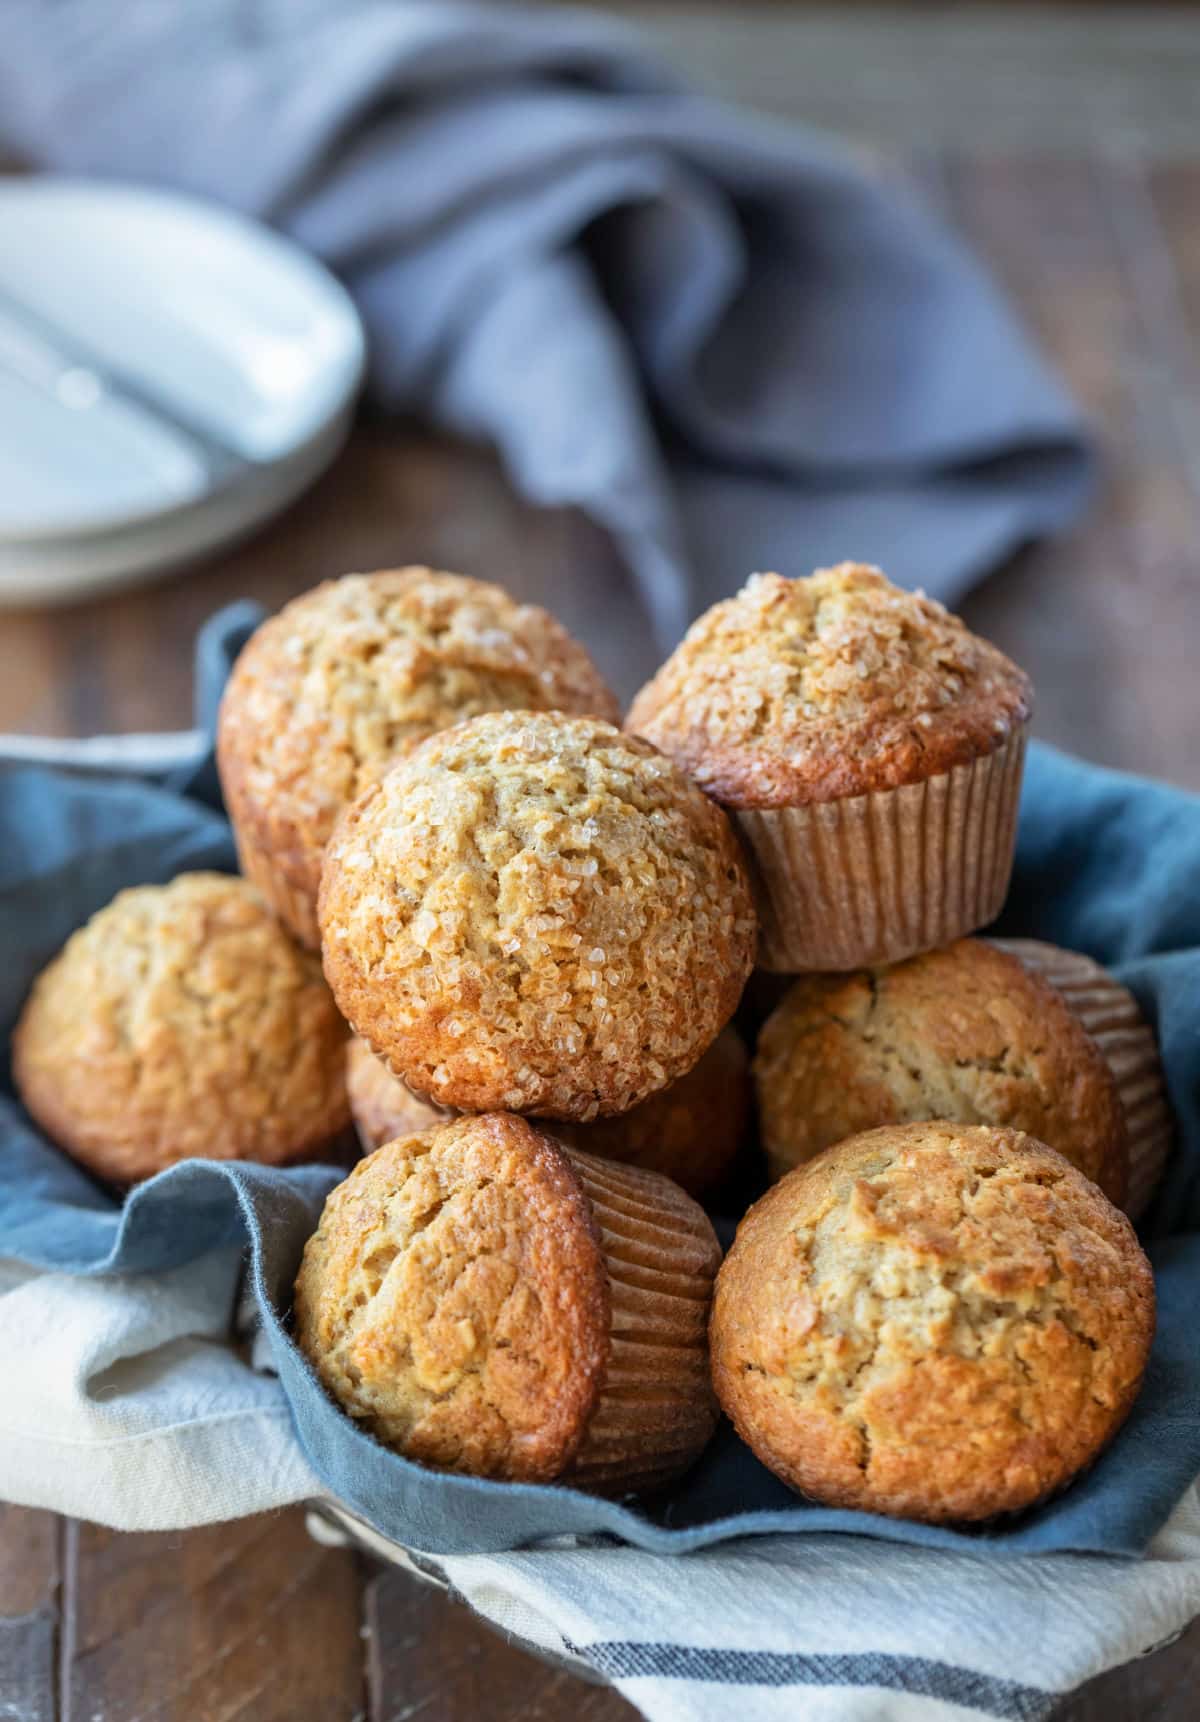 A basket of oatmeal muffins next to a stack of white plates.